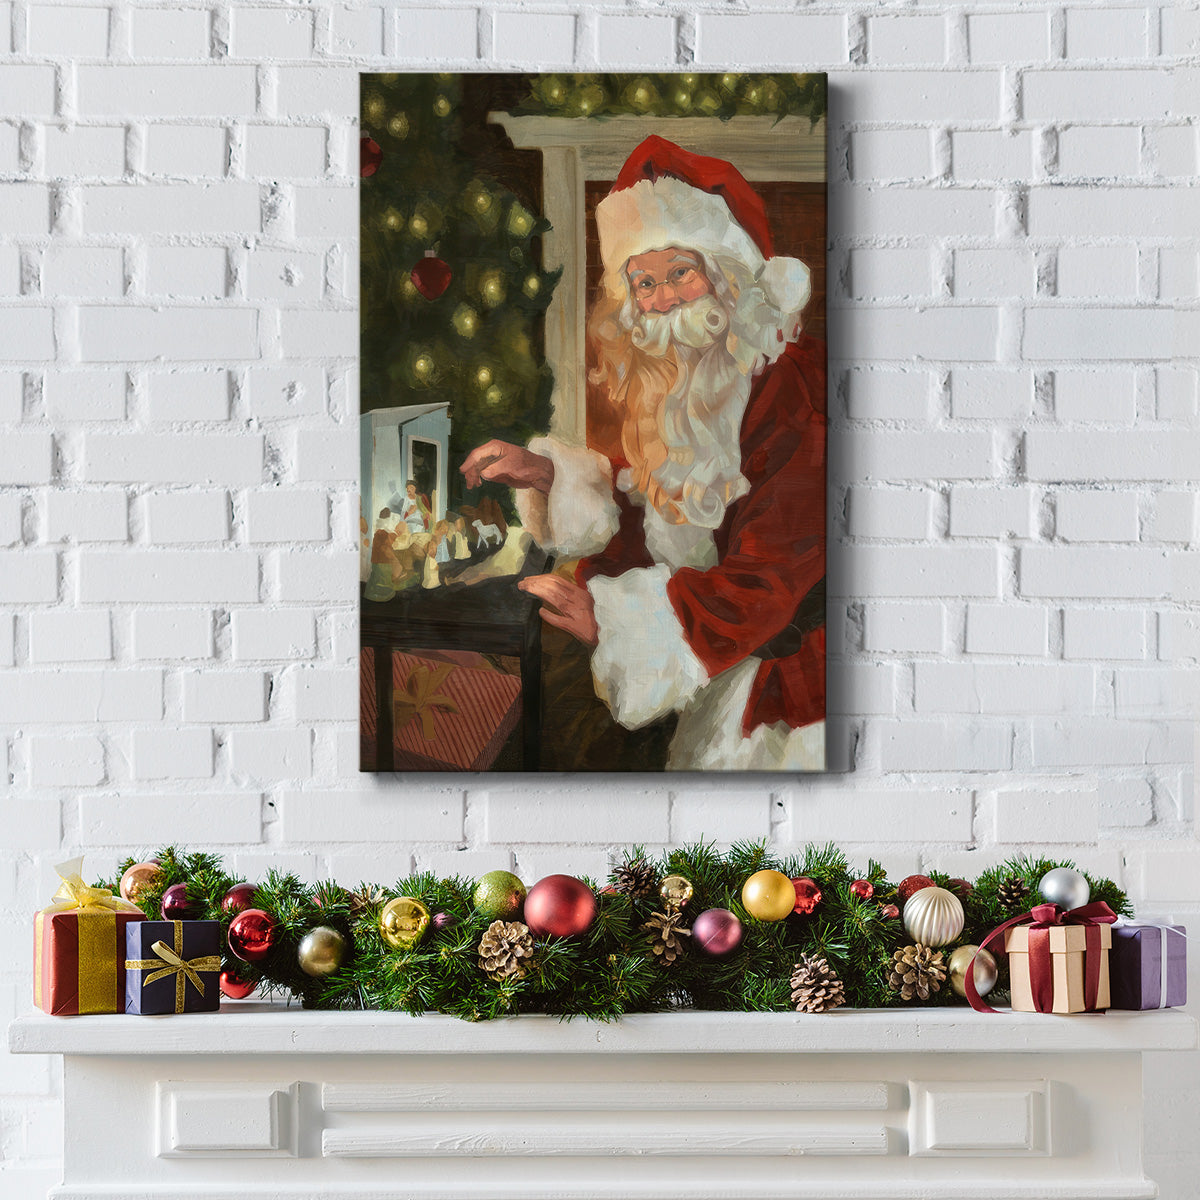 Saint Nick and the Nativity - Gallery Wrapped Canvas